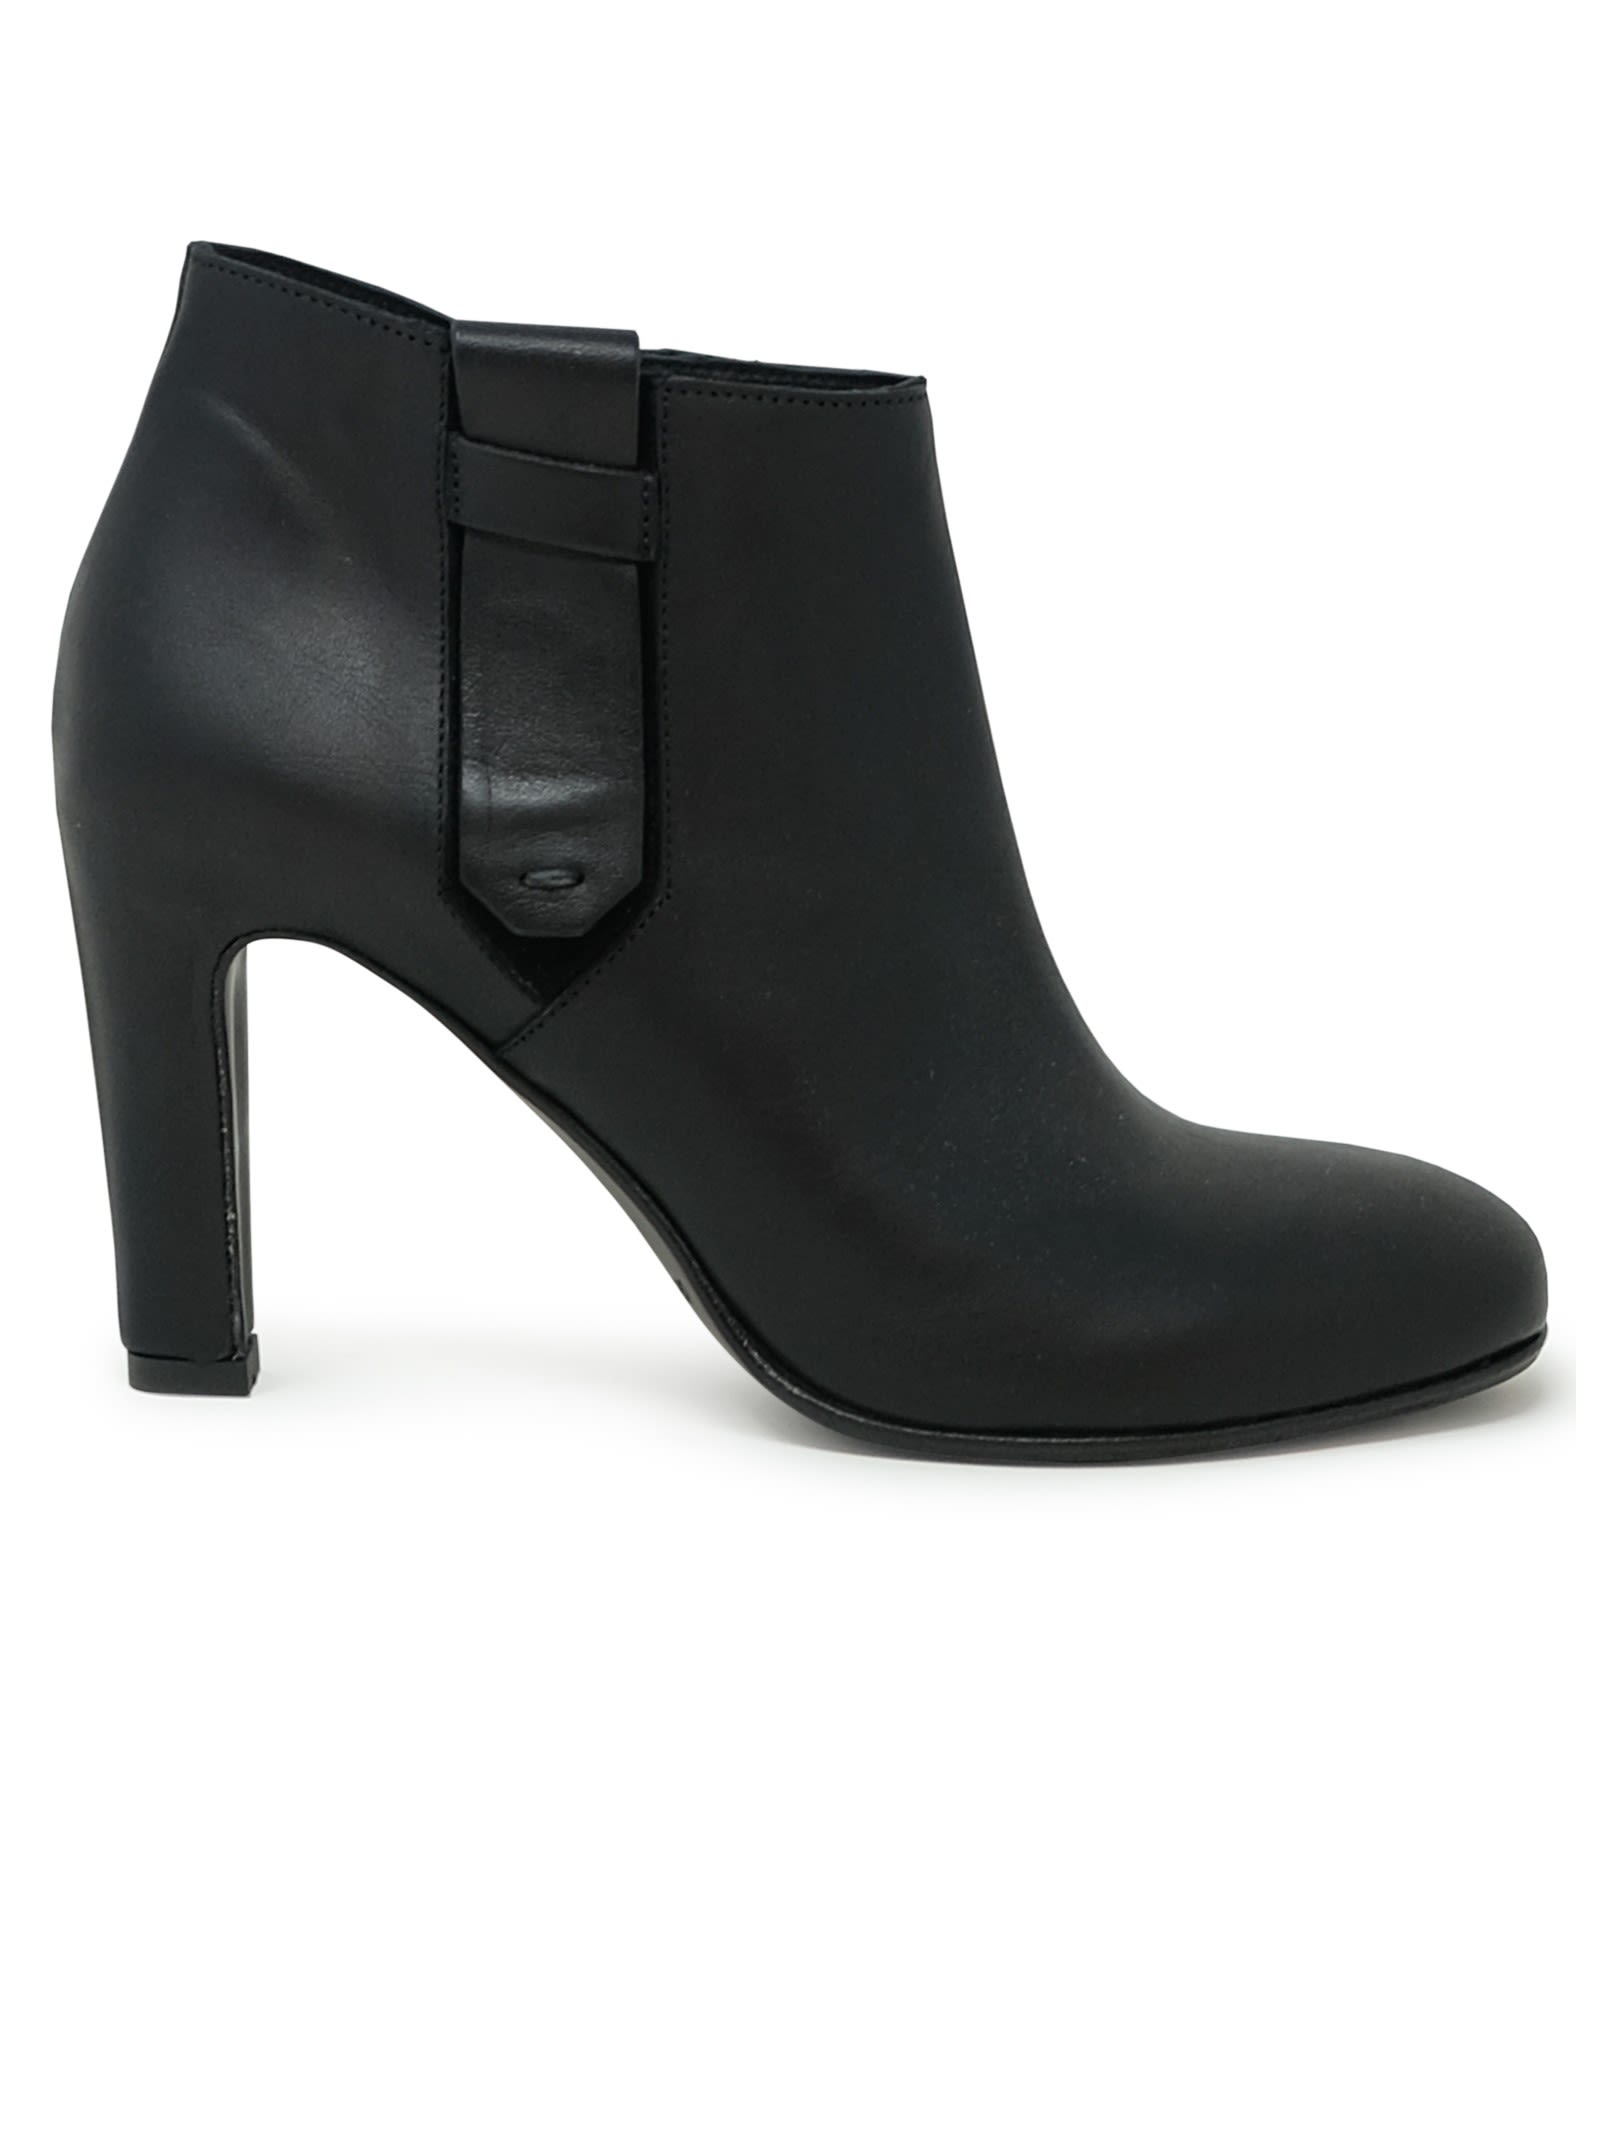 Roberto Del Carlo Leather Palmer Ankle Boots